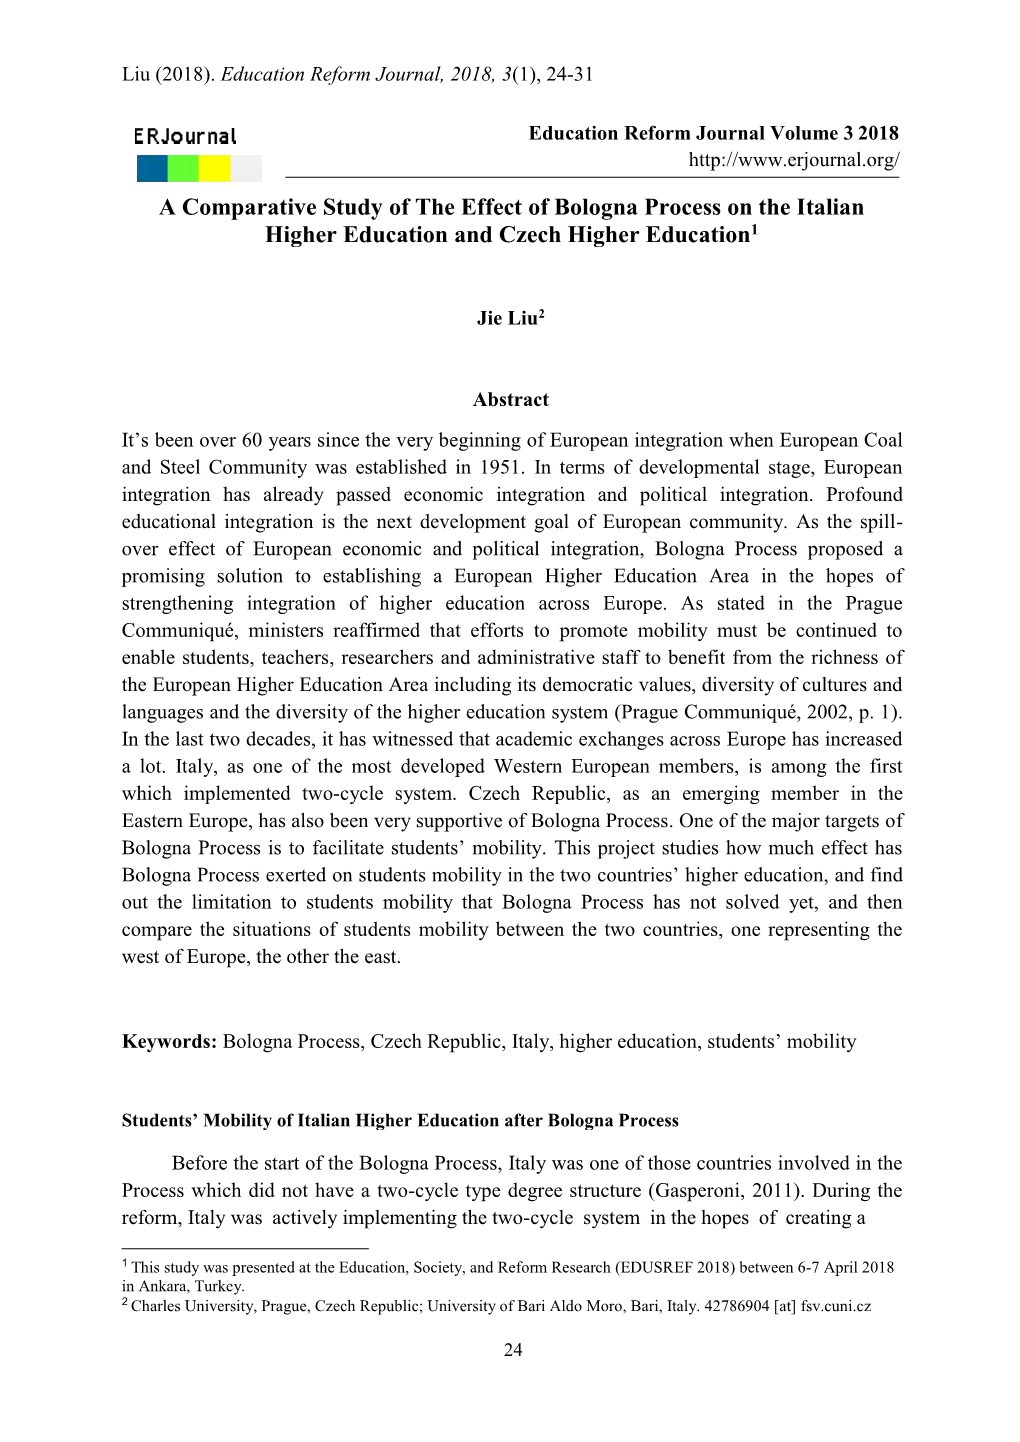 A Comparative Study of the Eff Higher Education and Rative Study of The